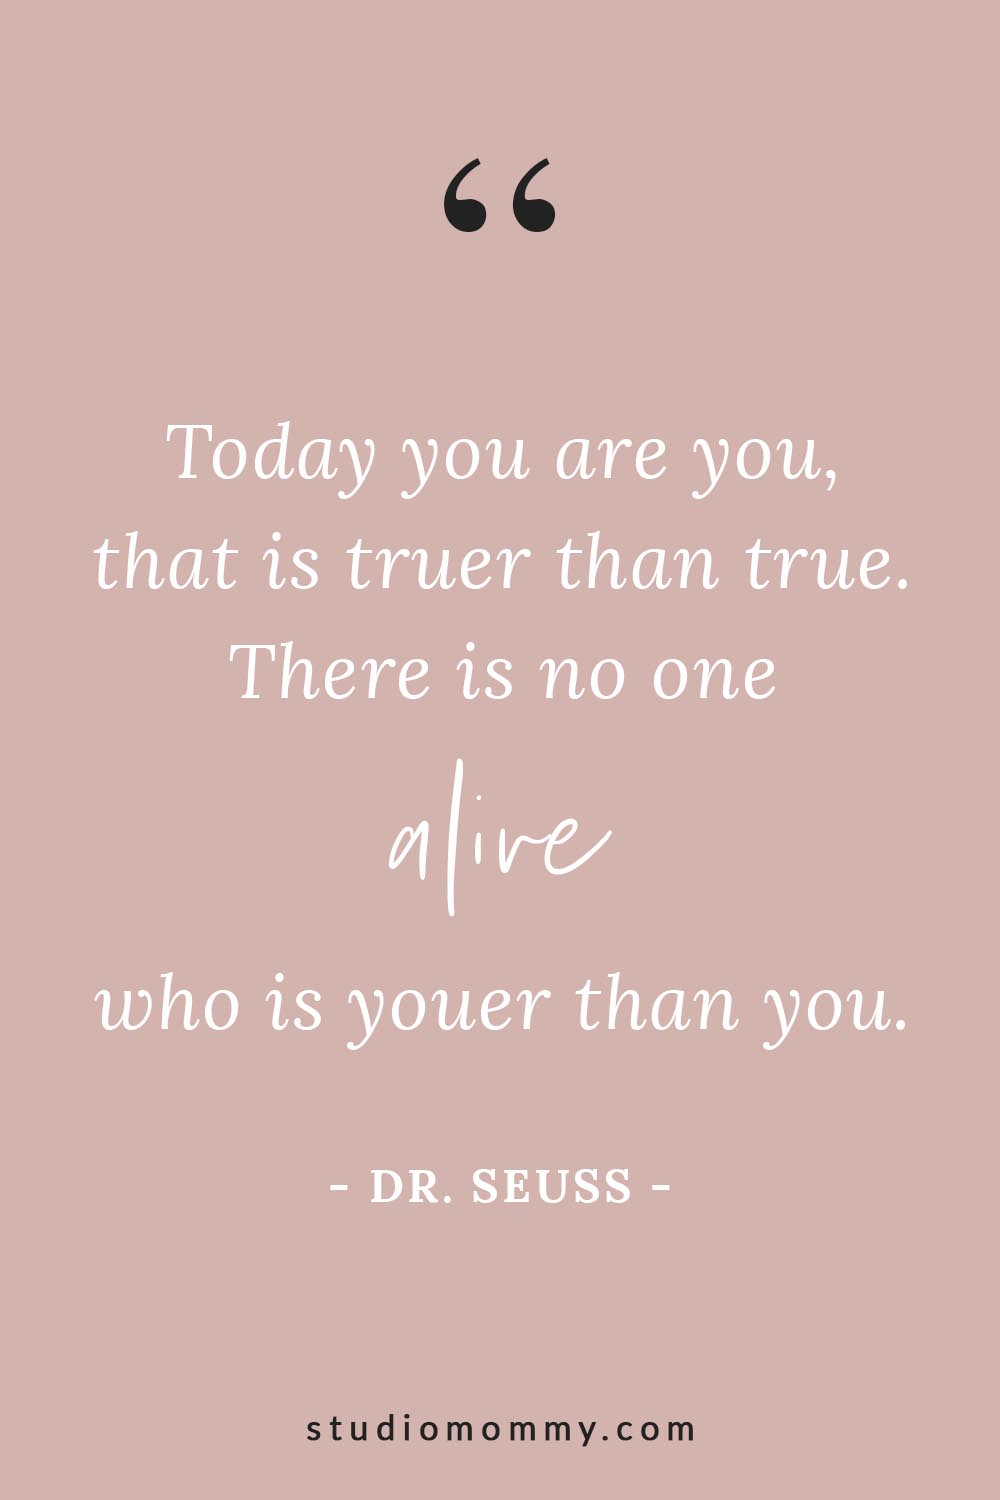 Today you are you, that is truer than true. There is no one alive who is youer than you. - Dr. Seuss @studiomommy